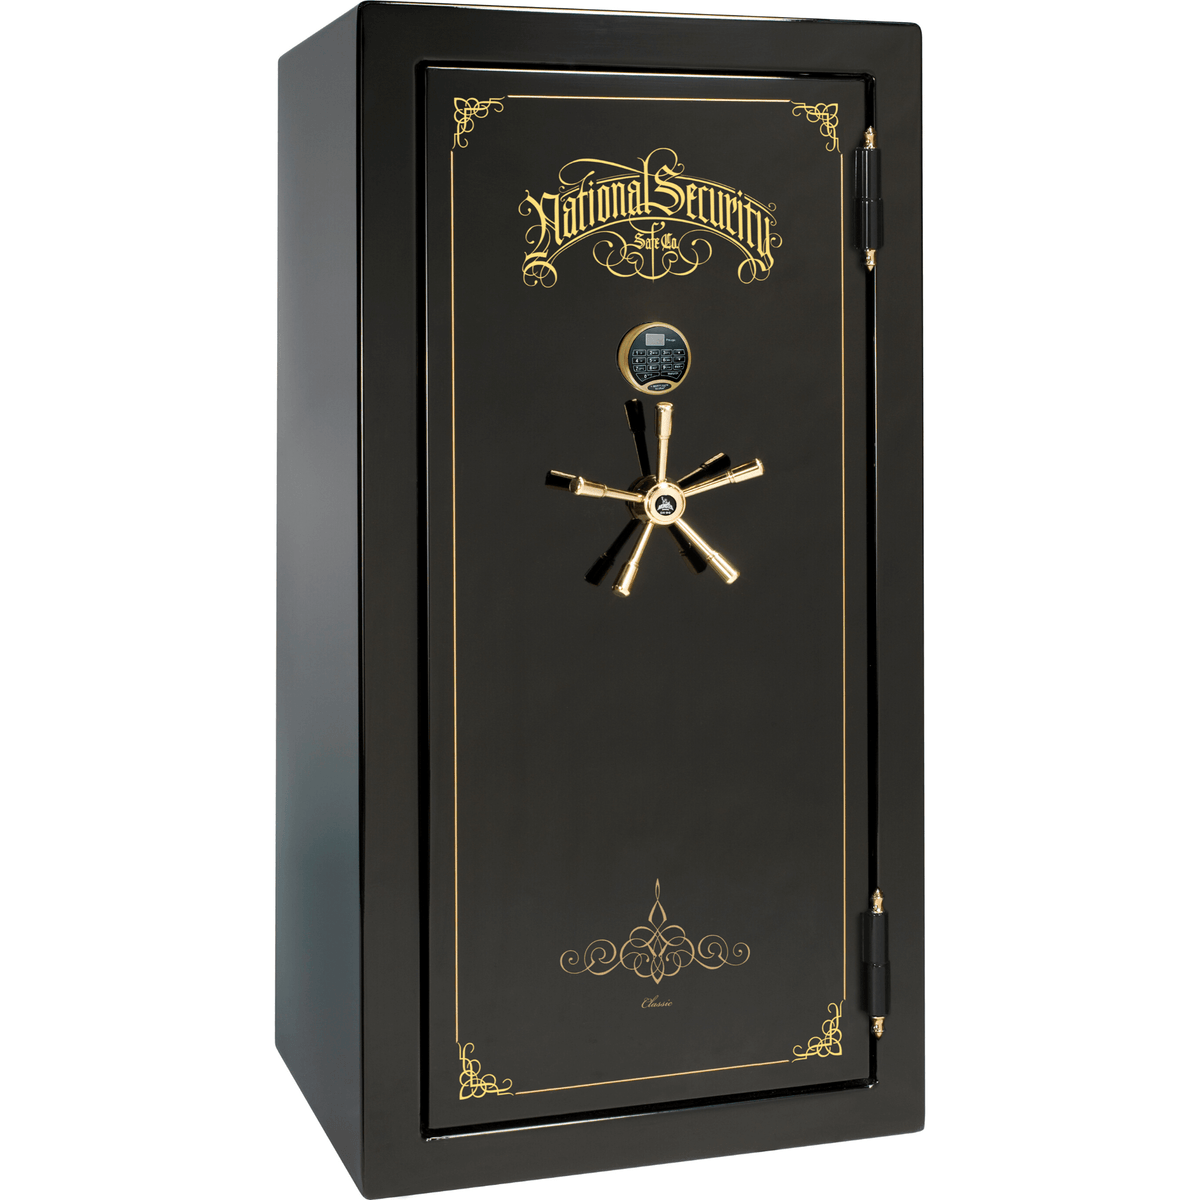 Liberty Safe Classic Plus 25 in Black Gloss with Brass Electronic Lock, closed door.